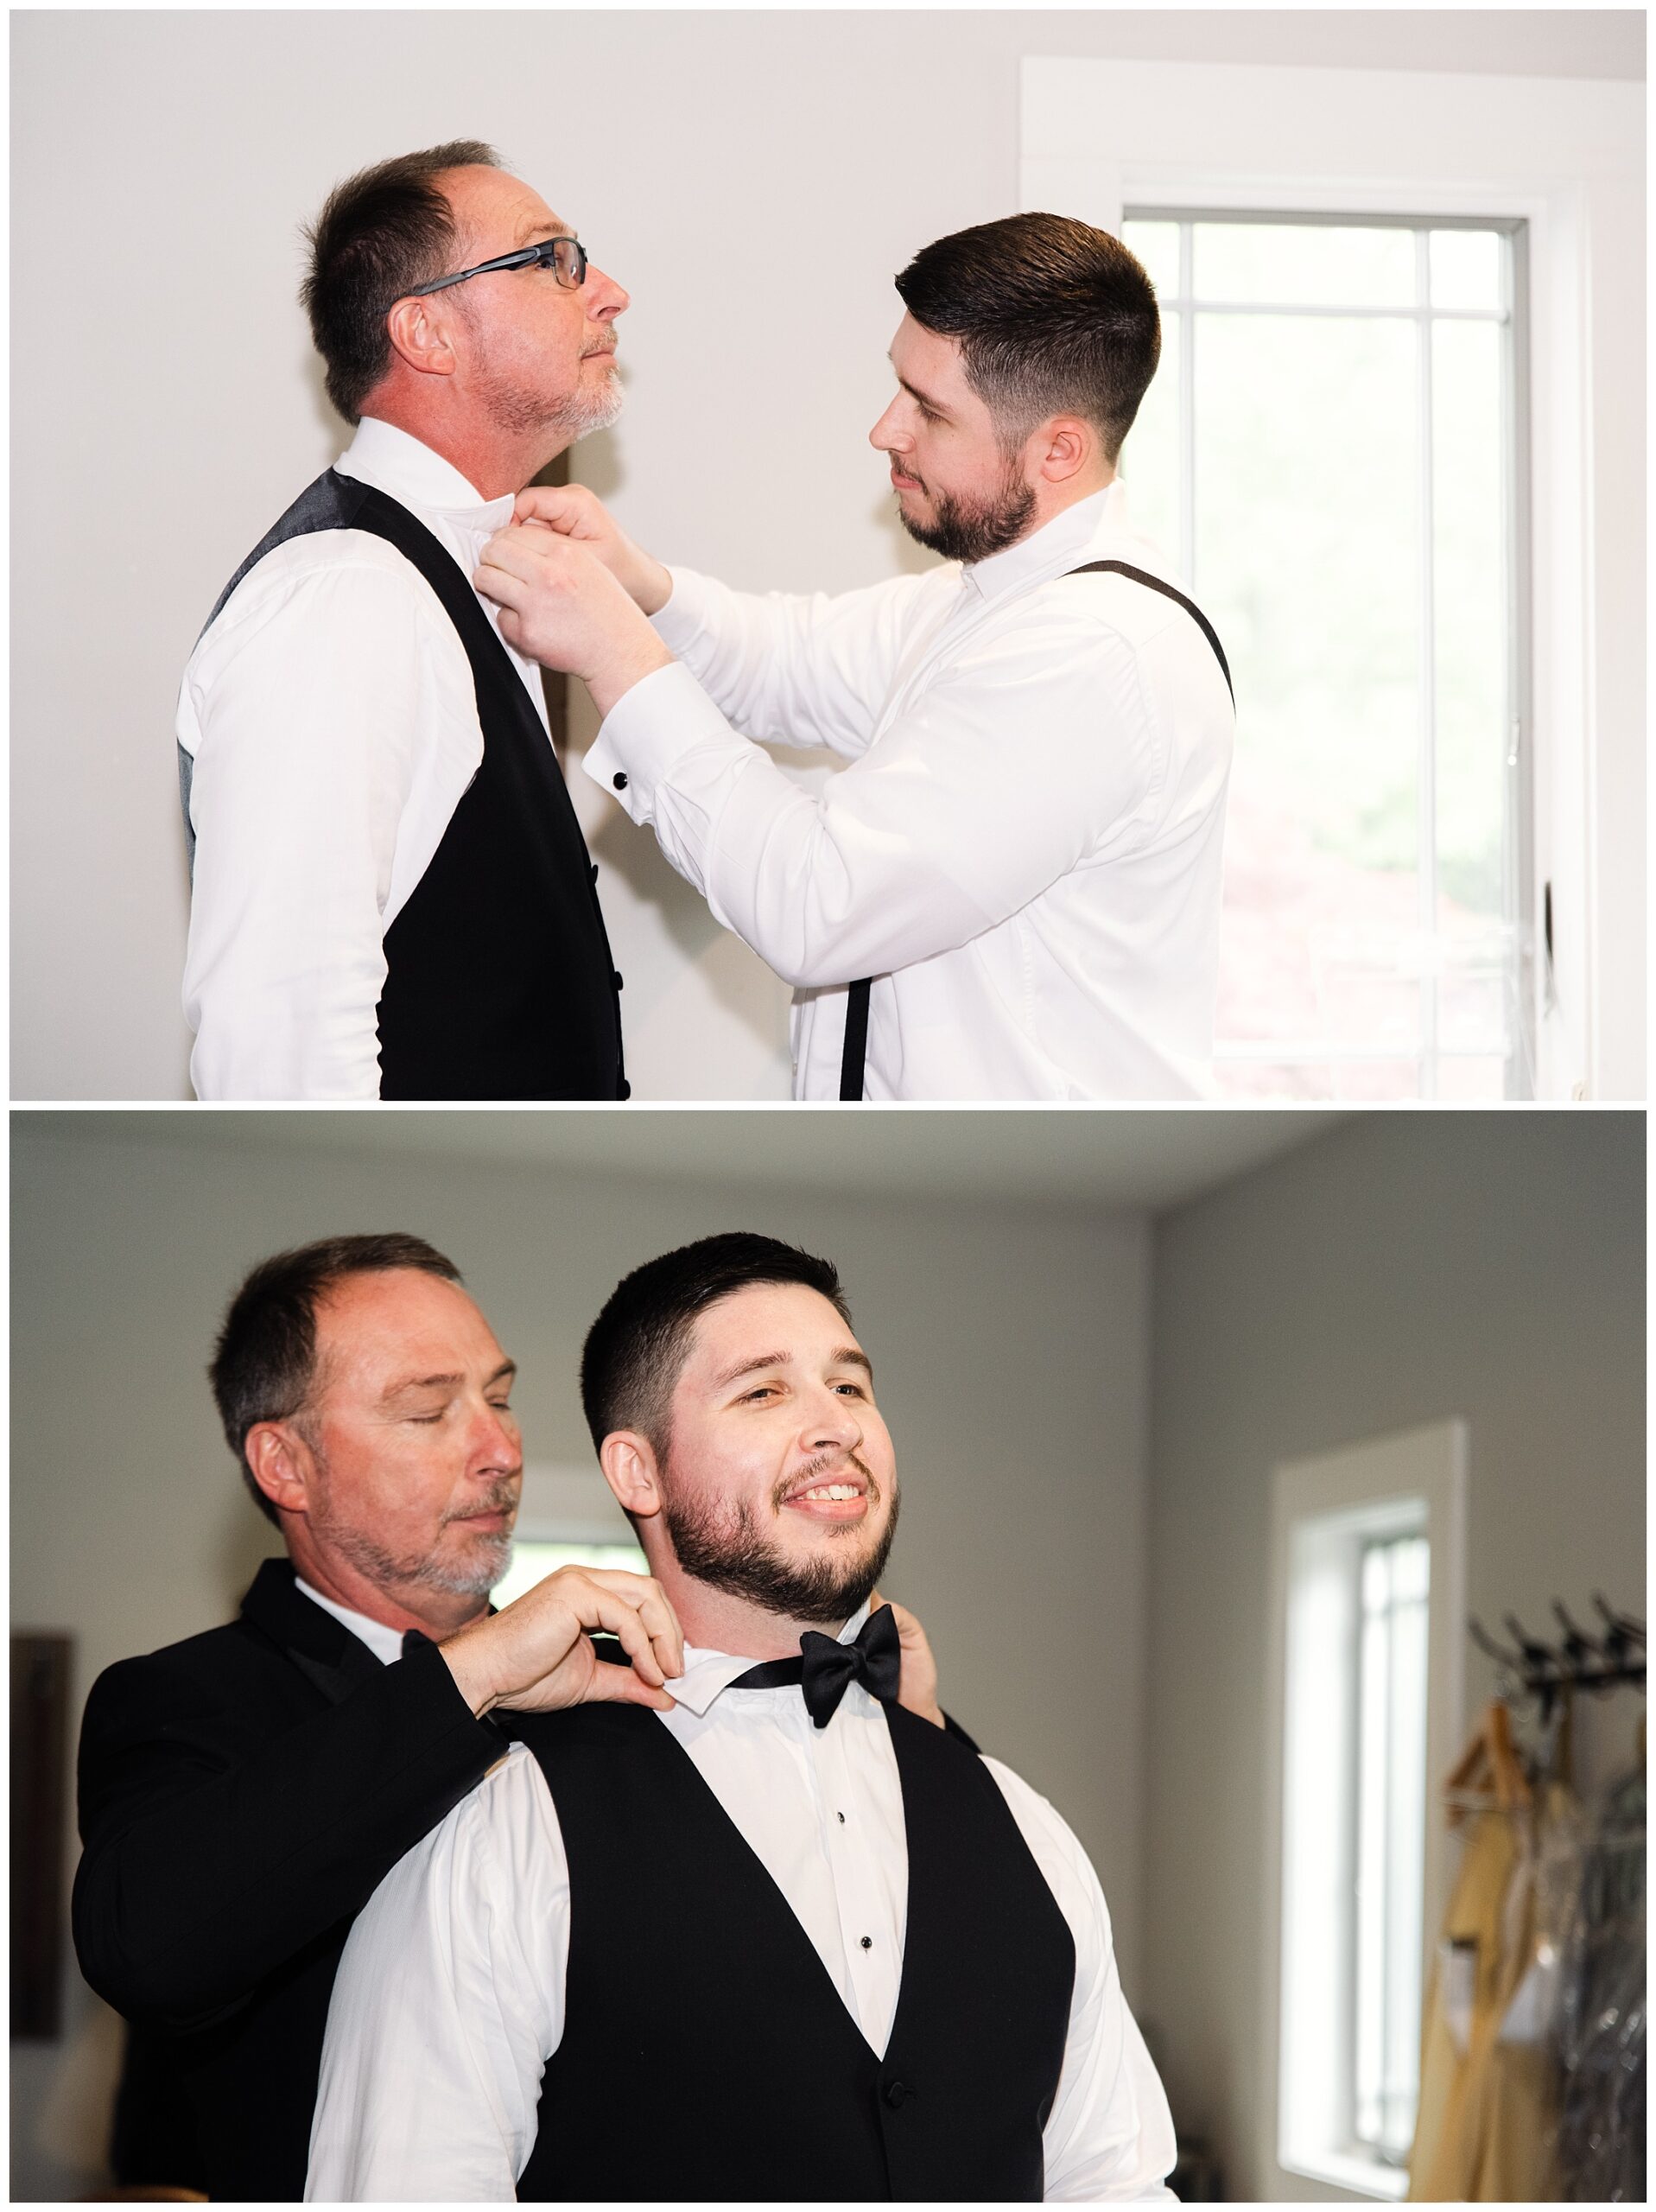 An older man adjusts a younger man's bow tie in a well-lit room at Chestnut Ridge, both dressed in formal black and white tuxedos, sharing a joyful moment.